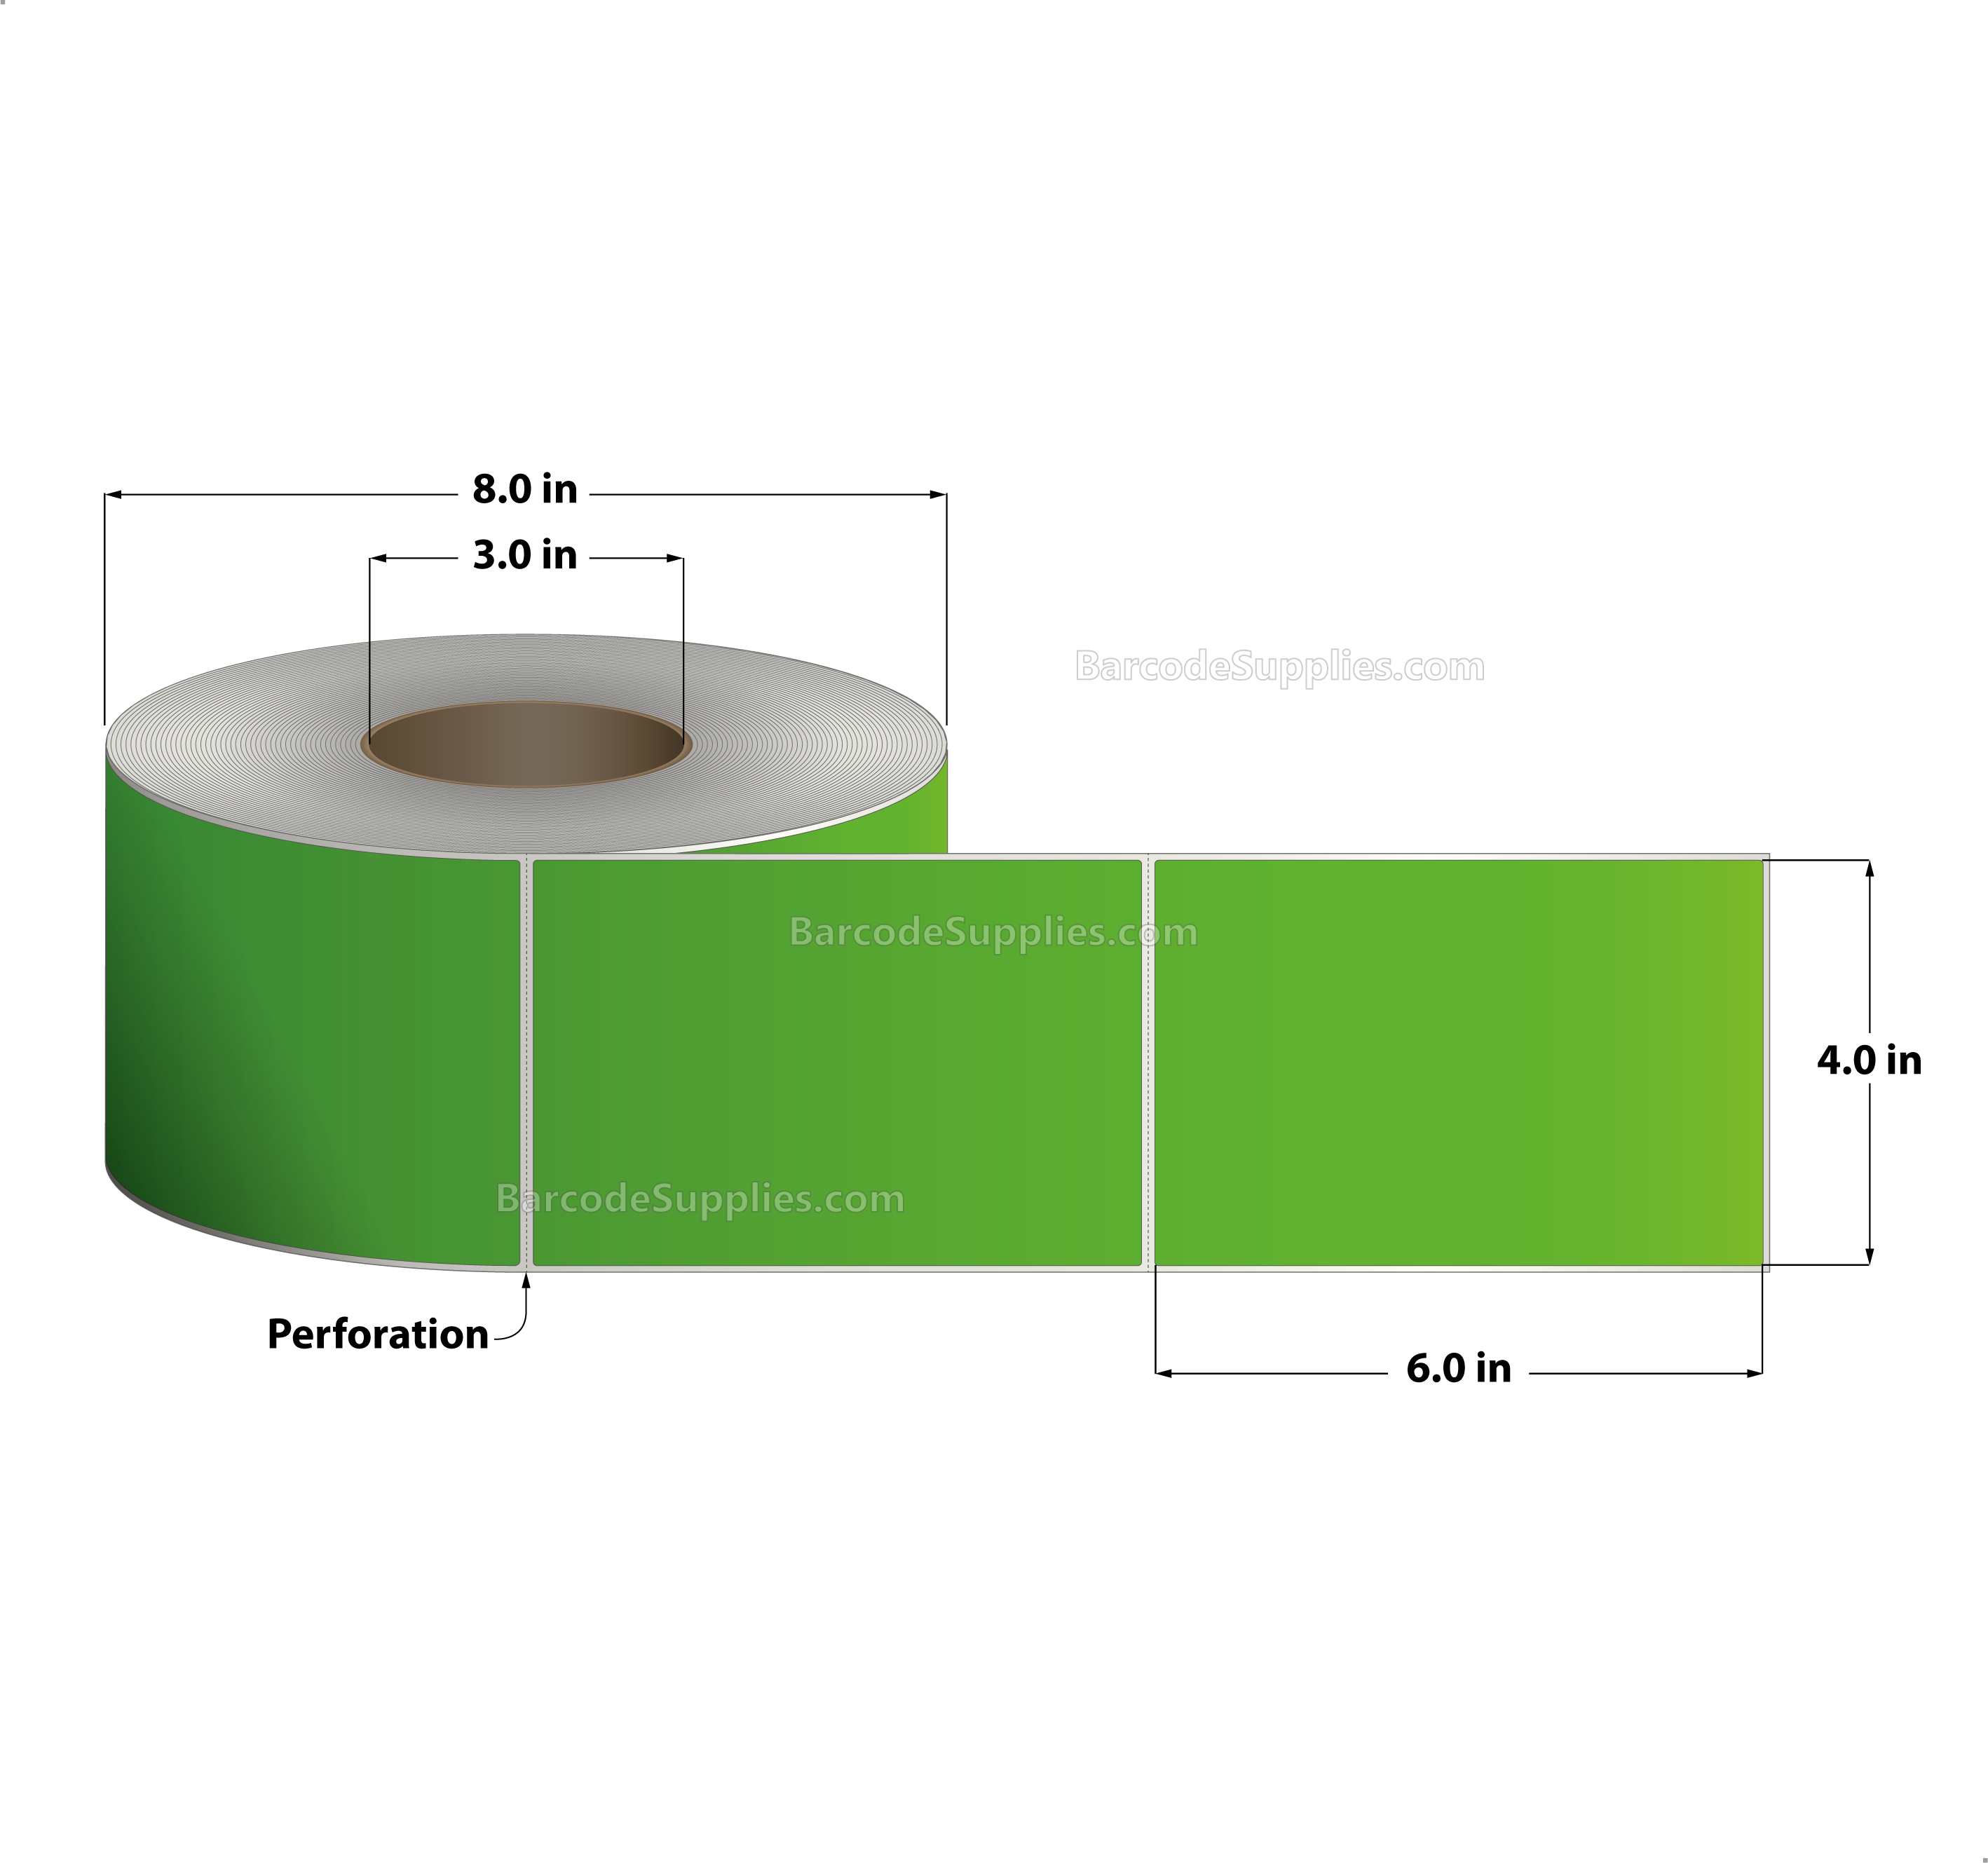 4 x 6 Thermal Transfer Fluorescent 802 Green Labels With Permanent Adhesive - Perforated - 1000 Labels Per Roll - Carton Of 4 Rolls - 4000 Labels Total - MPN: FL-4-6-1000-GR